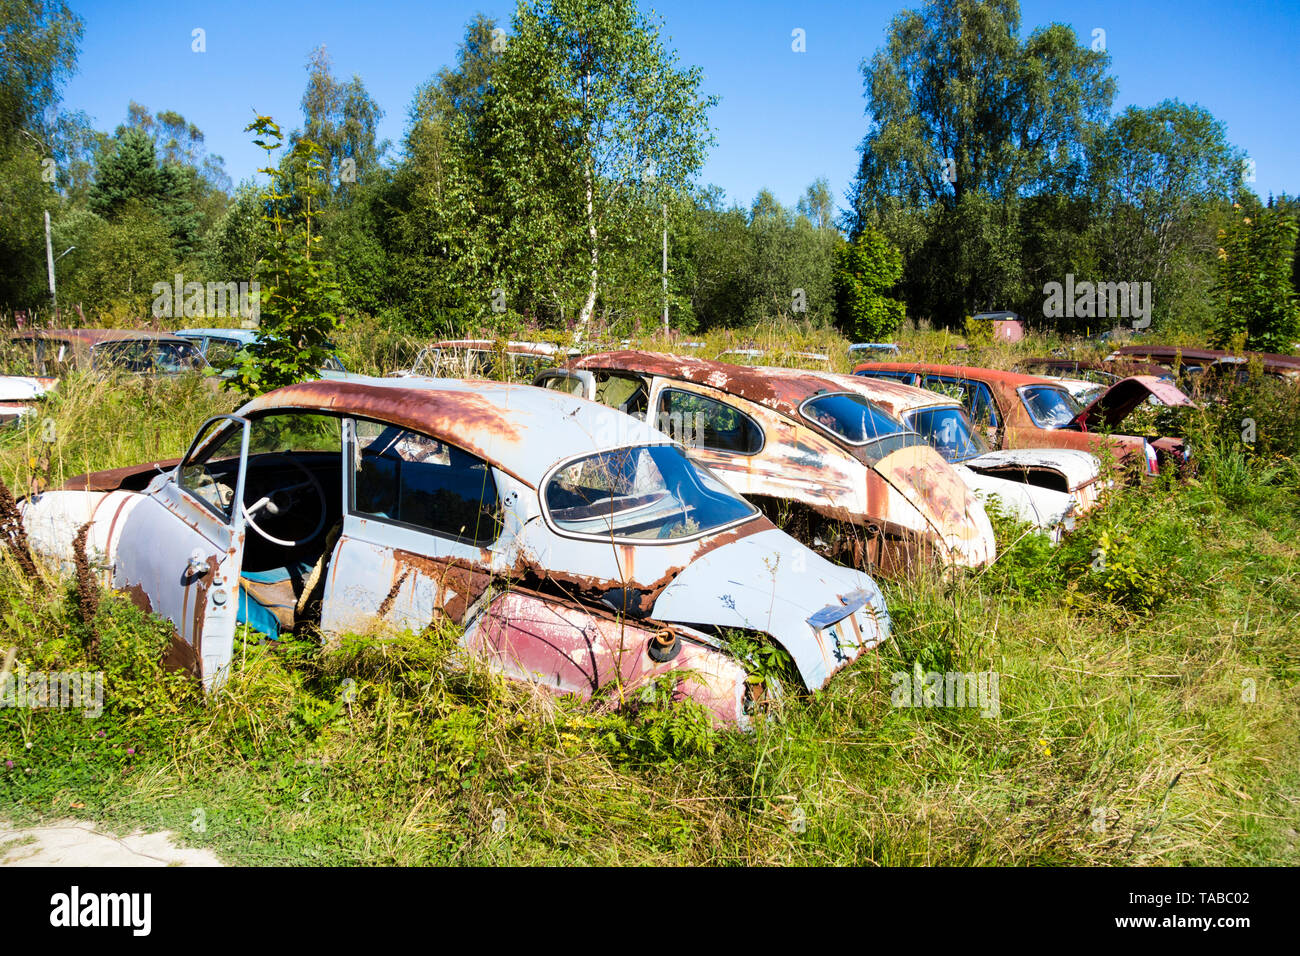 Wrecked oldtimer cars Stock Photo